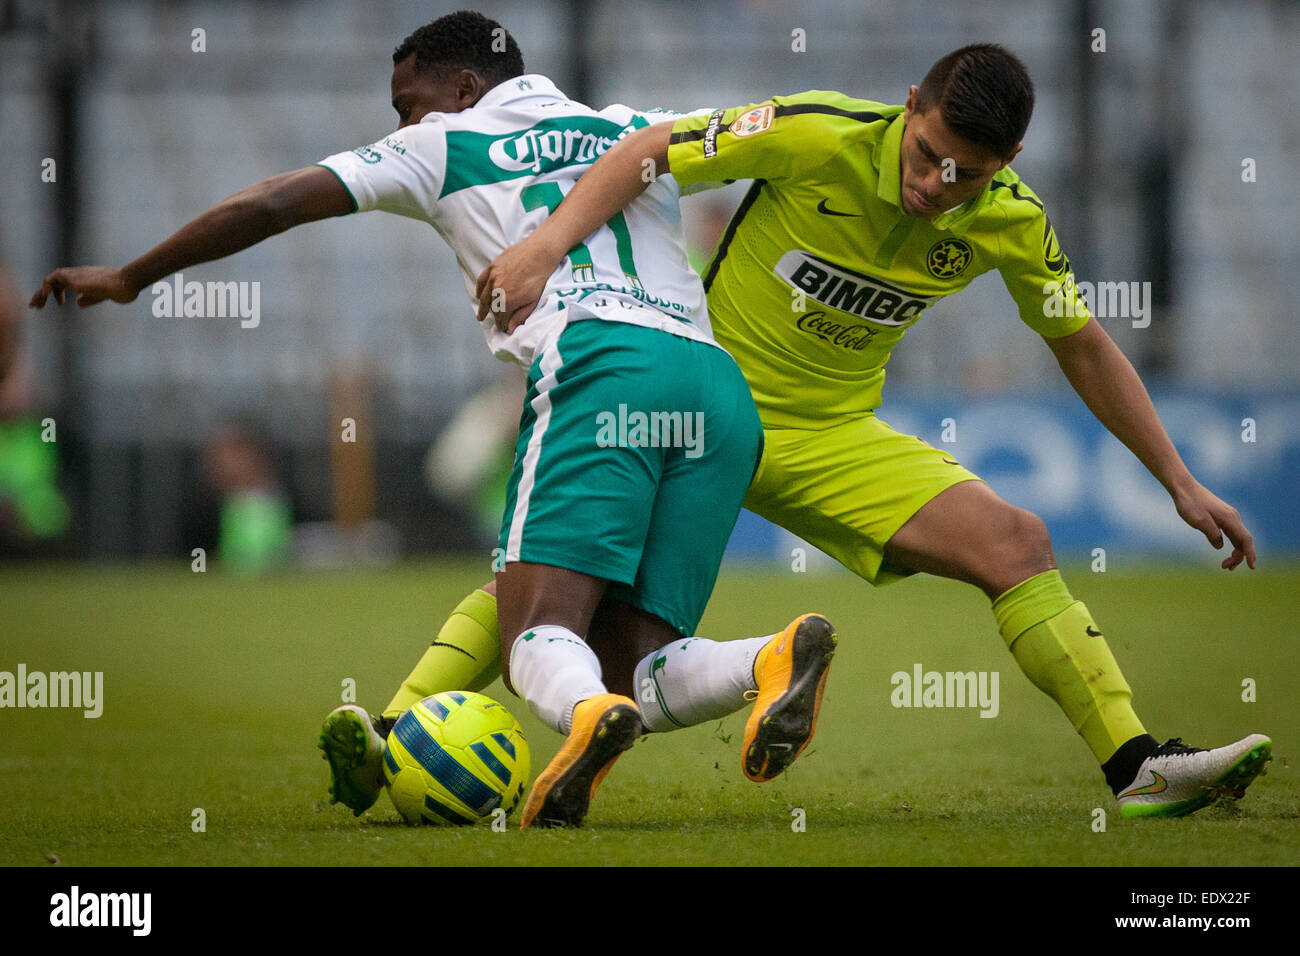 Mexico City, Mexico. 10th Jan, 2015. America's Paul Aguilar (R) vies with Leon's Marcos Caicedo during the match corresponding to the Day 1 of the Closing Tournament 2015 of MX League in the Azteca Stadium in Mexico City, capital of Mexico, on Jan. 10, 2015. © Pedro Mera/Xinhua/Alamy Live News Stock Photo